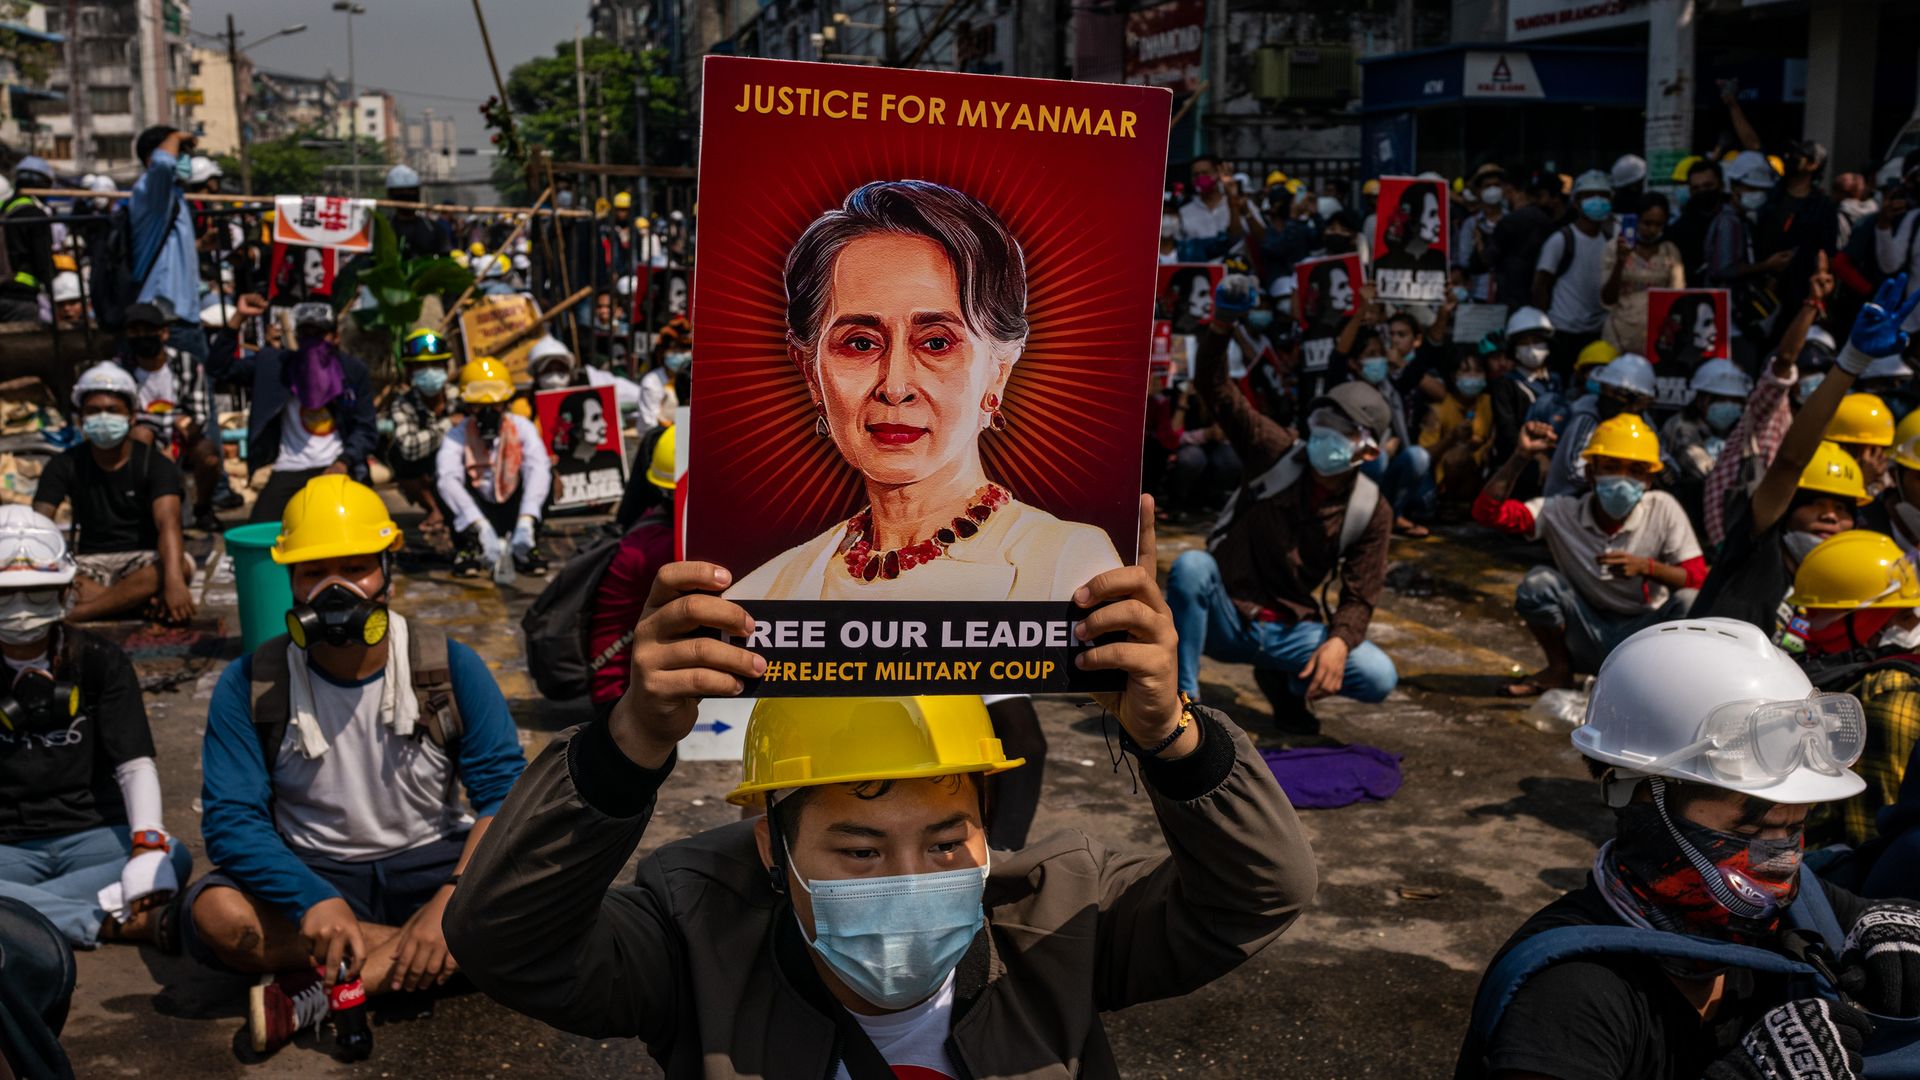  An anti-coup protester holds up a placard featuring de-facto leader Aung San Suu Kyi on March 02, 2021